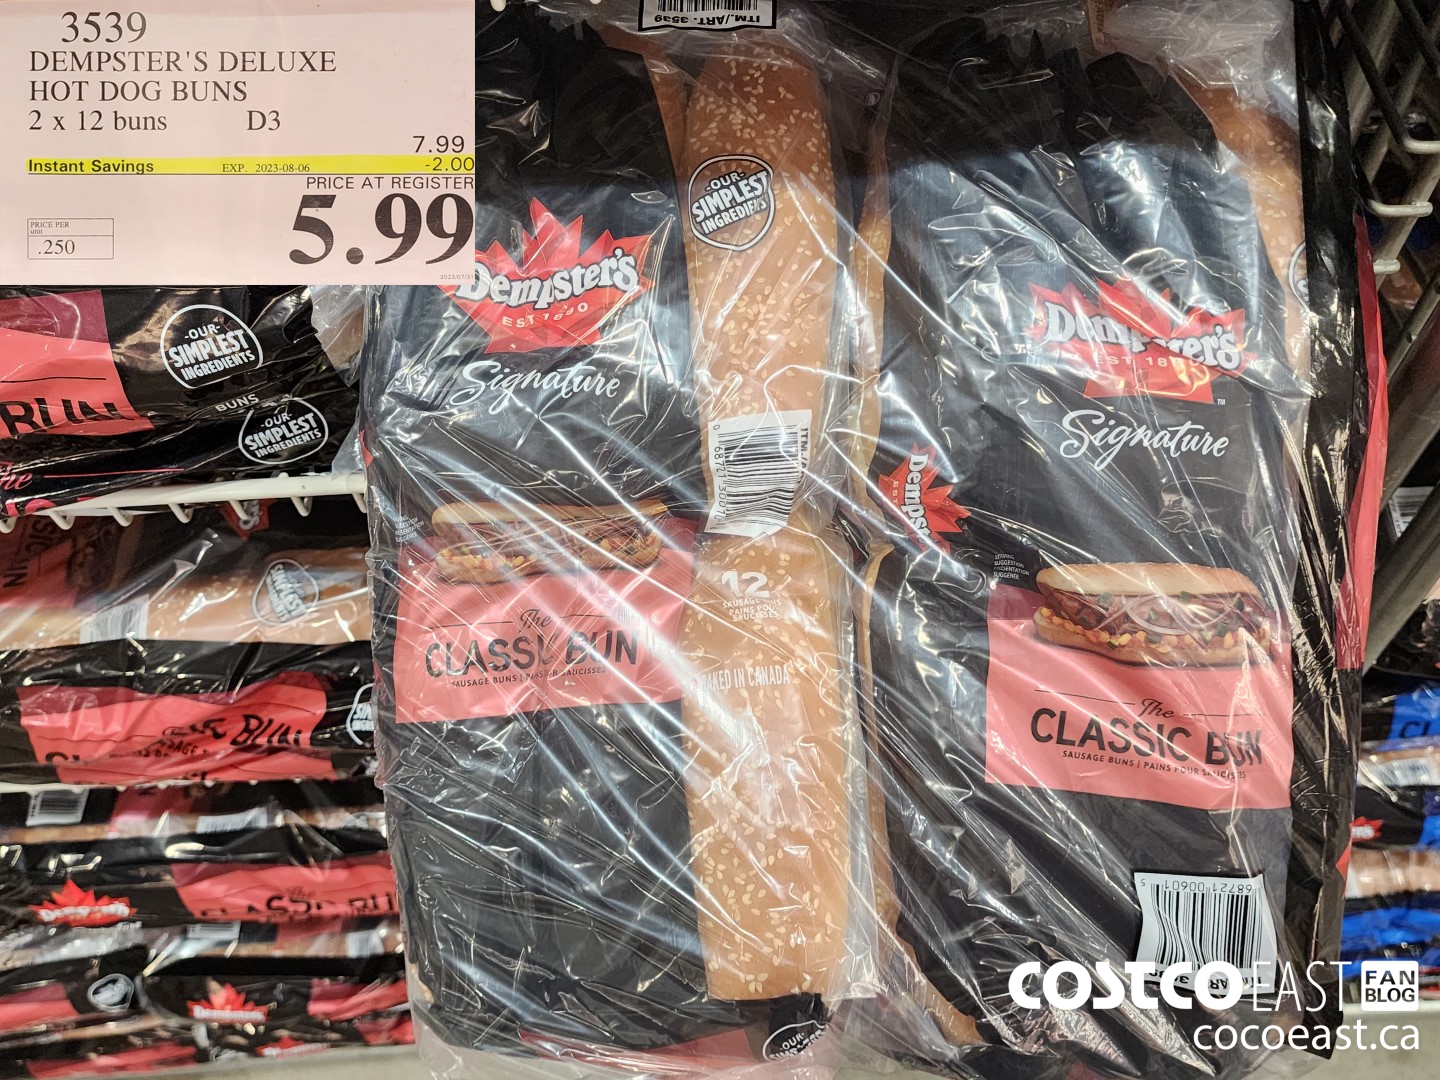 https://east.cocowest1.ca/2023/07/DEMPSTERS_DELUXE_HOT_DOG_BUNS_2_X_12_20230731_81975.jpg